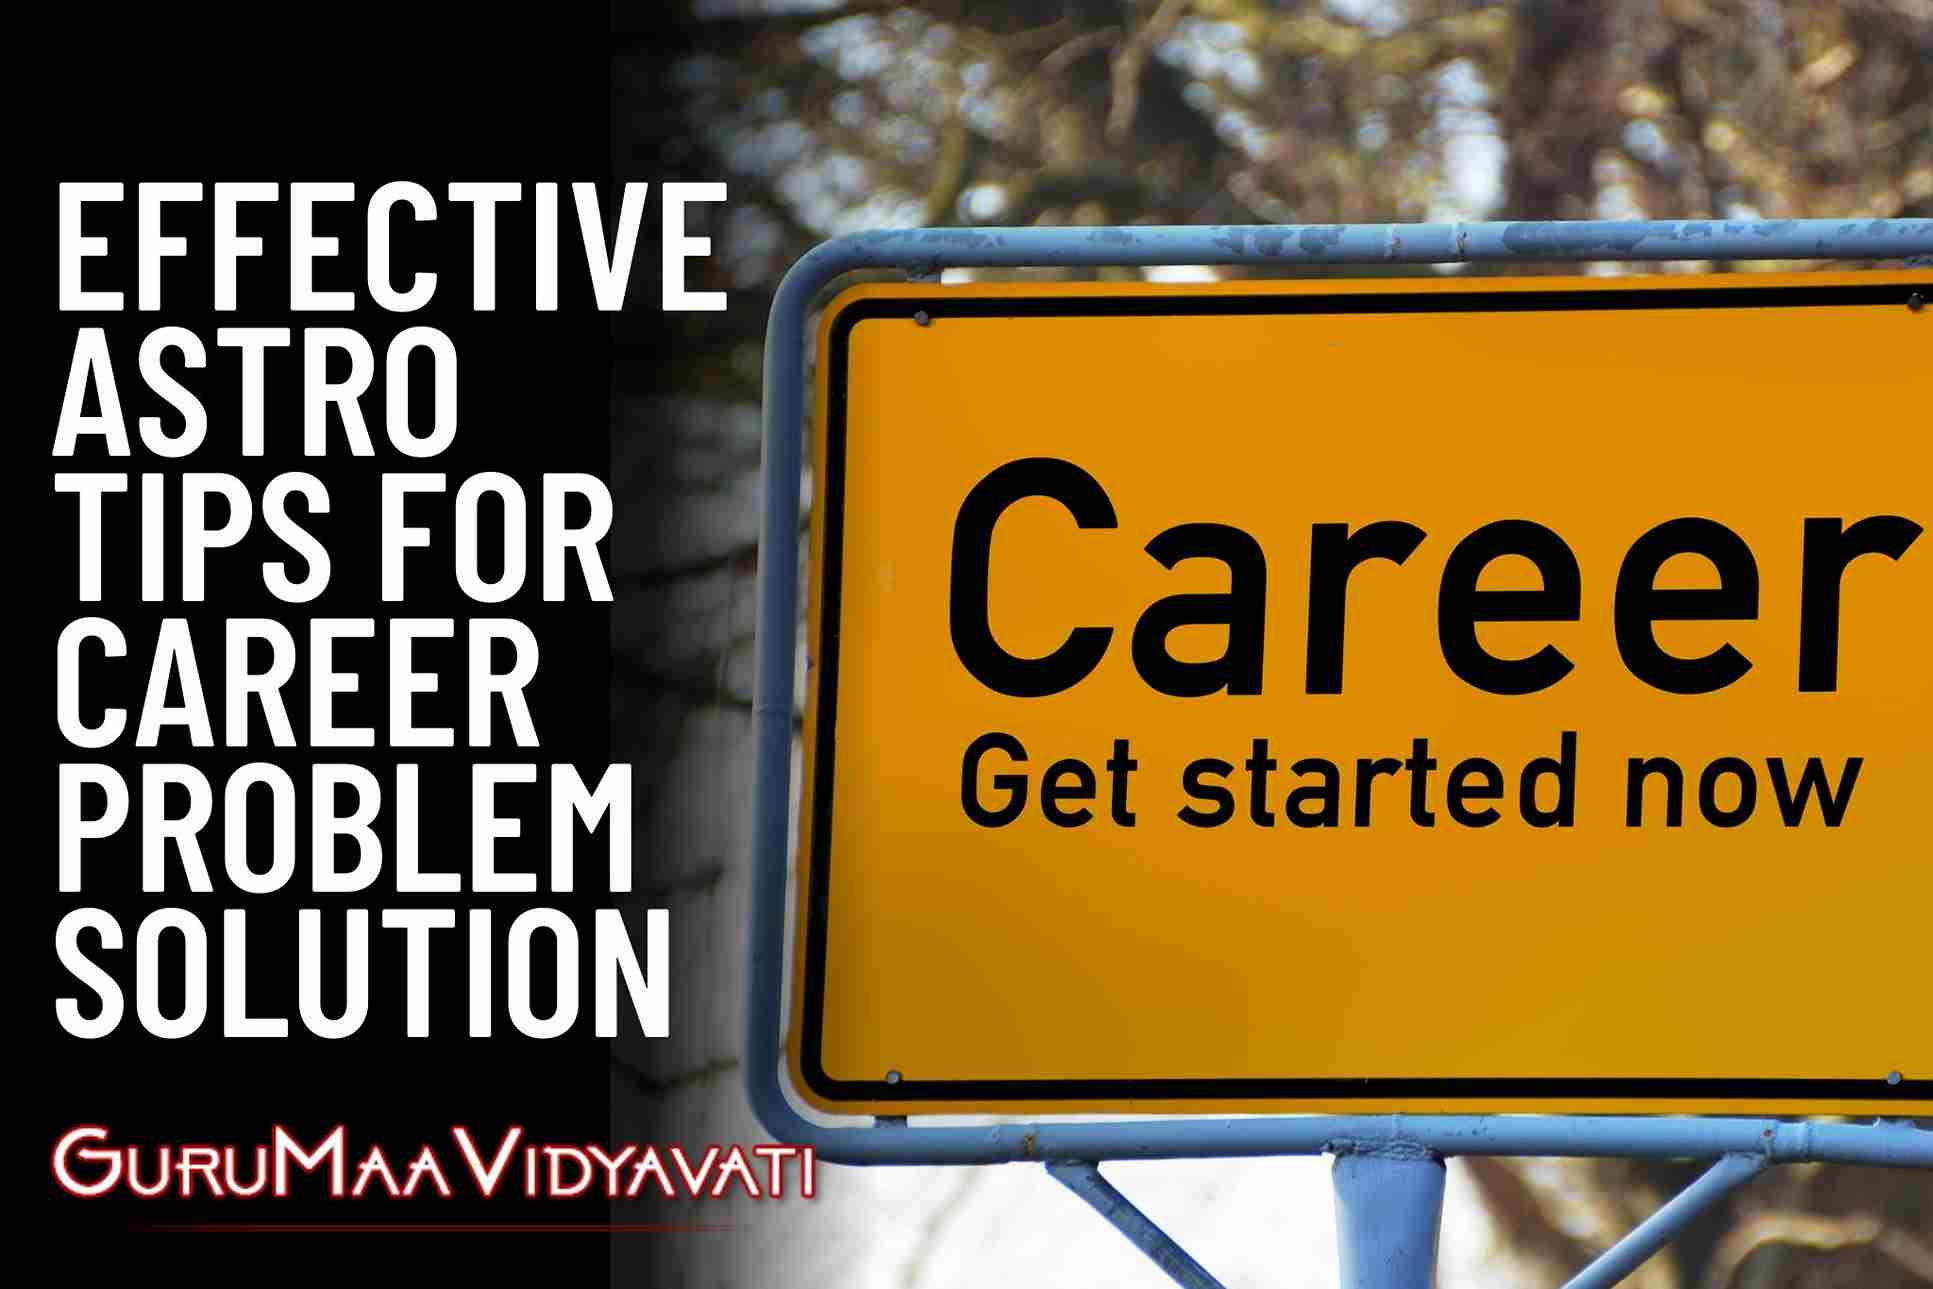 Astrology Career Advice: Effective Astro Tips for Career Problem Solution